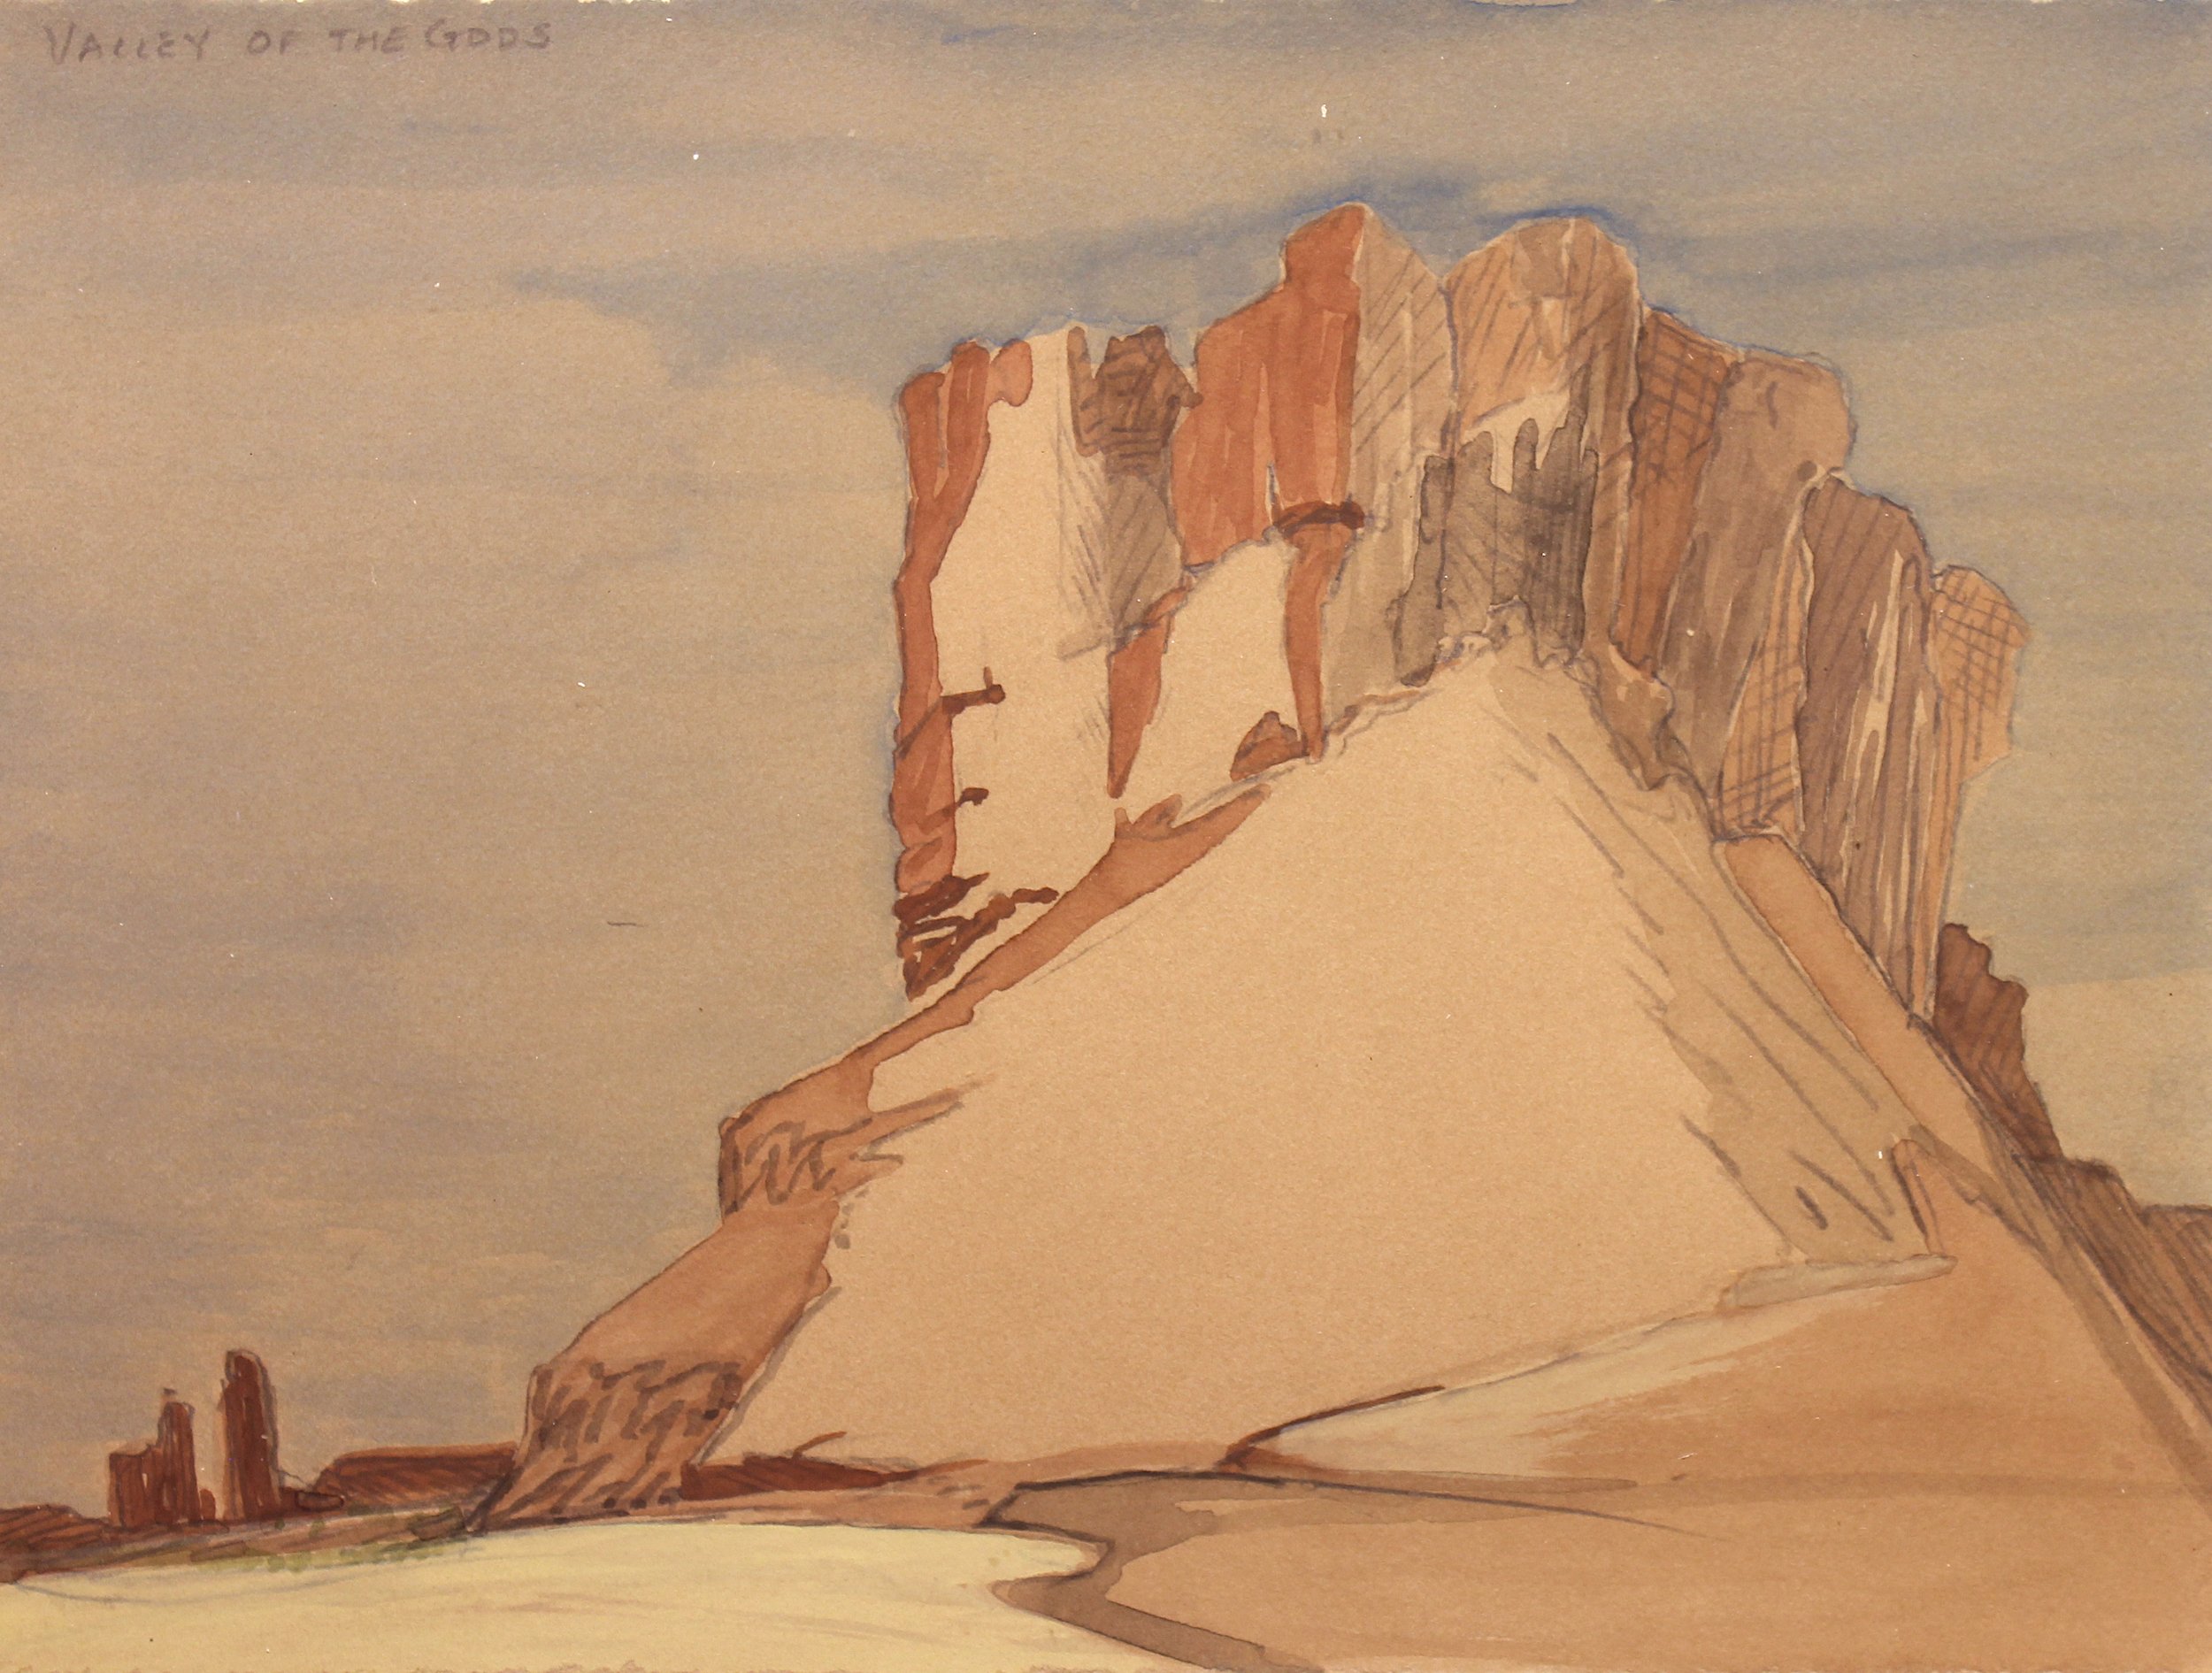 Watercolors of the Colorado: Valley of the Gods